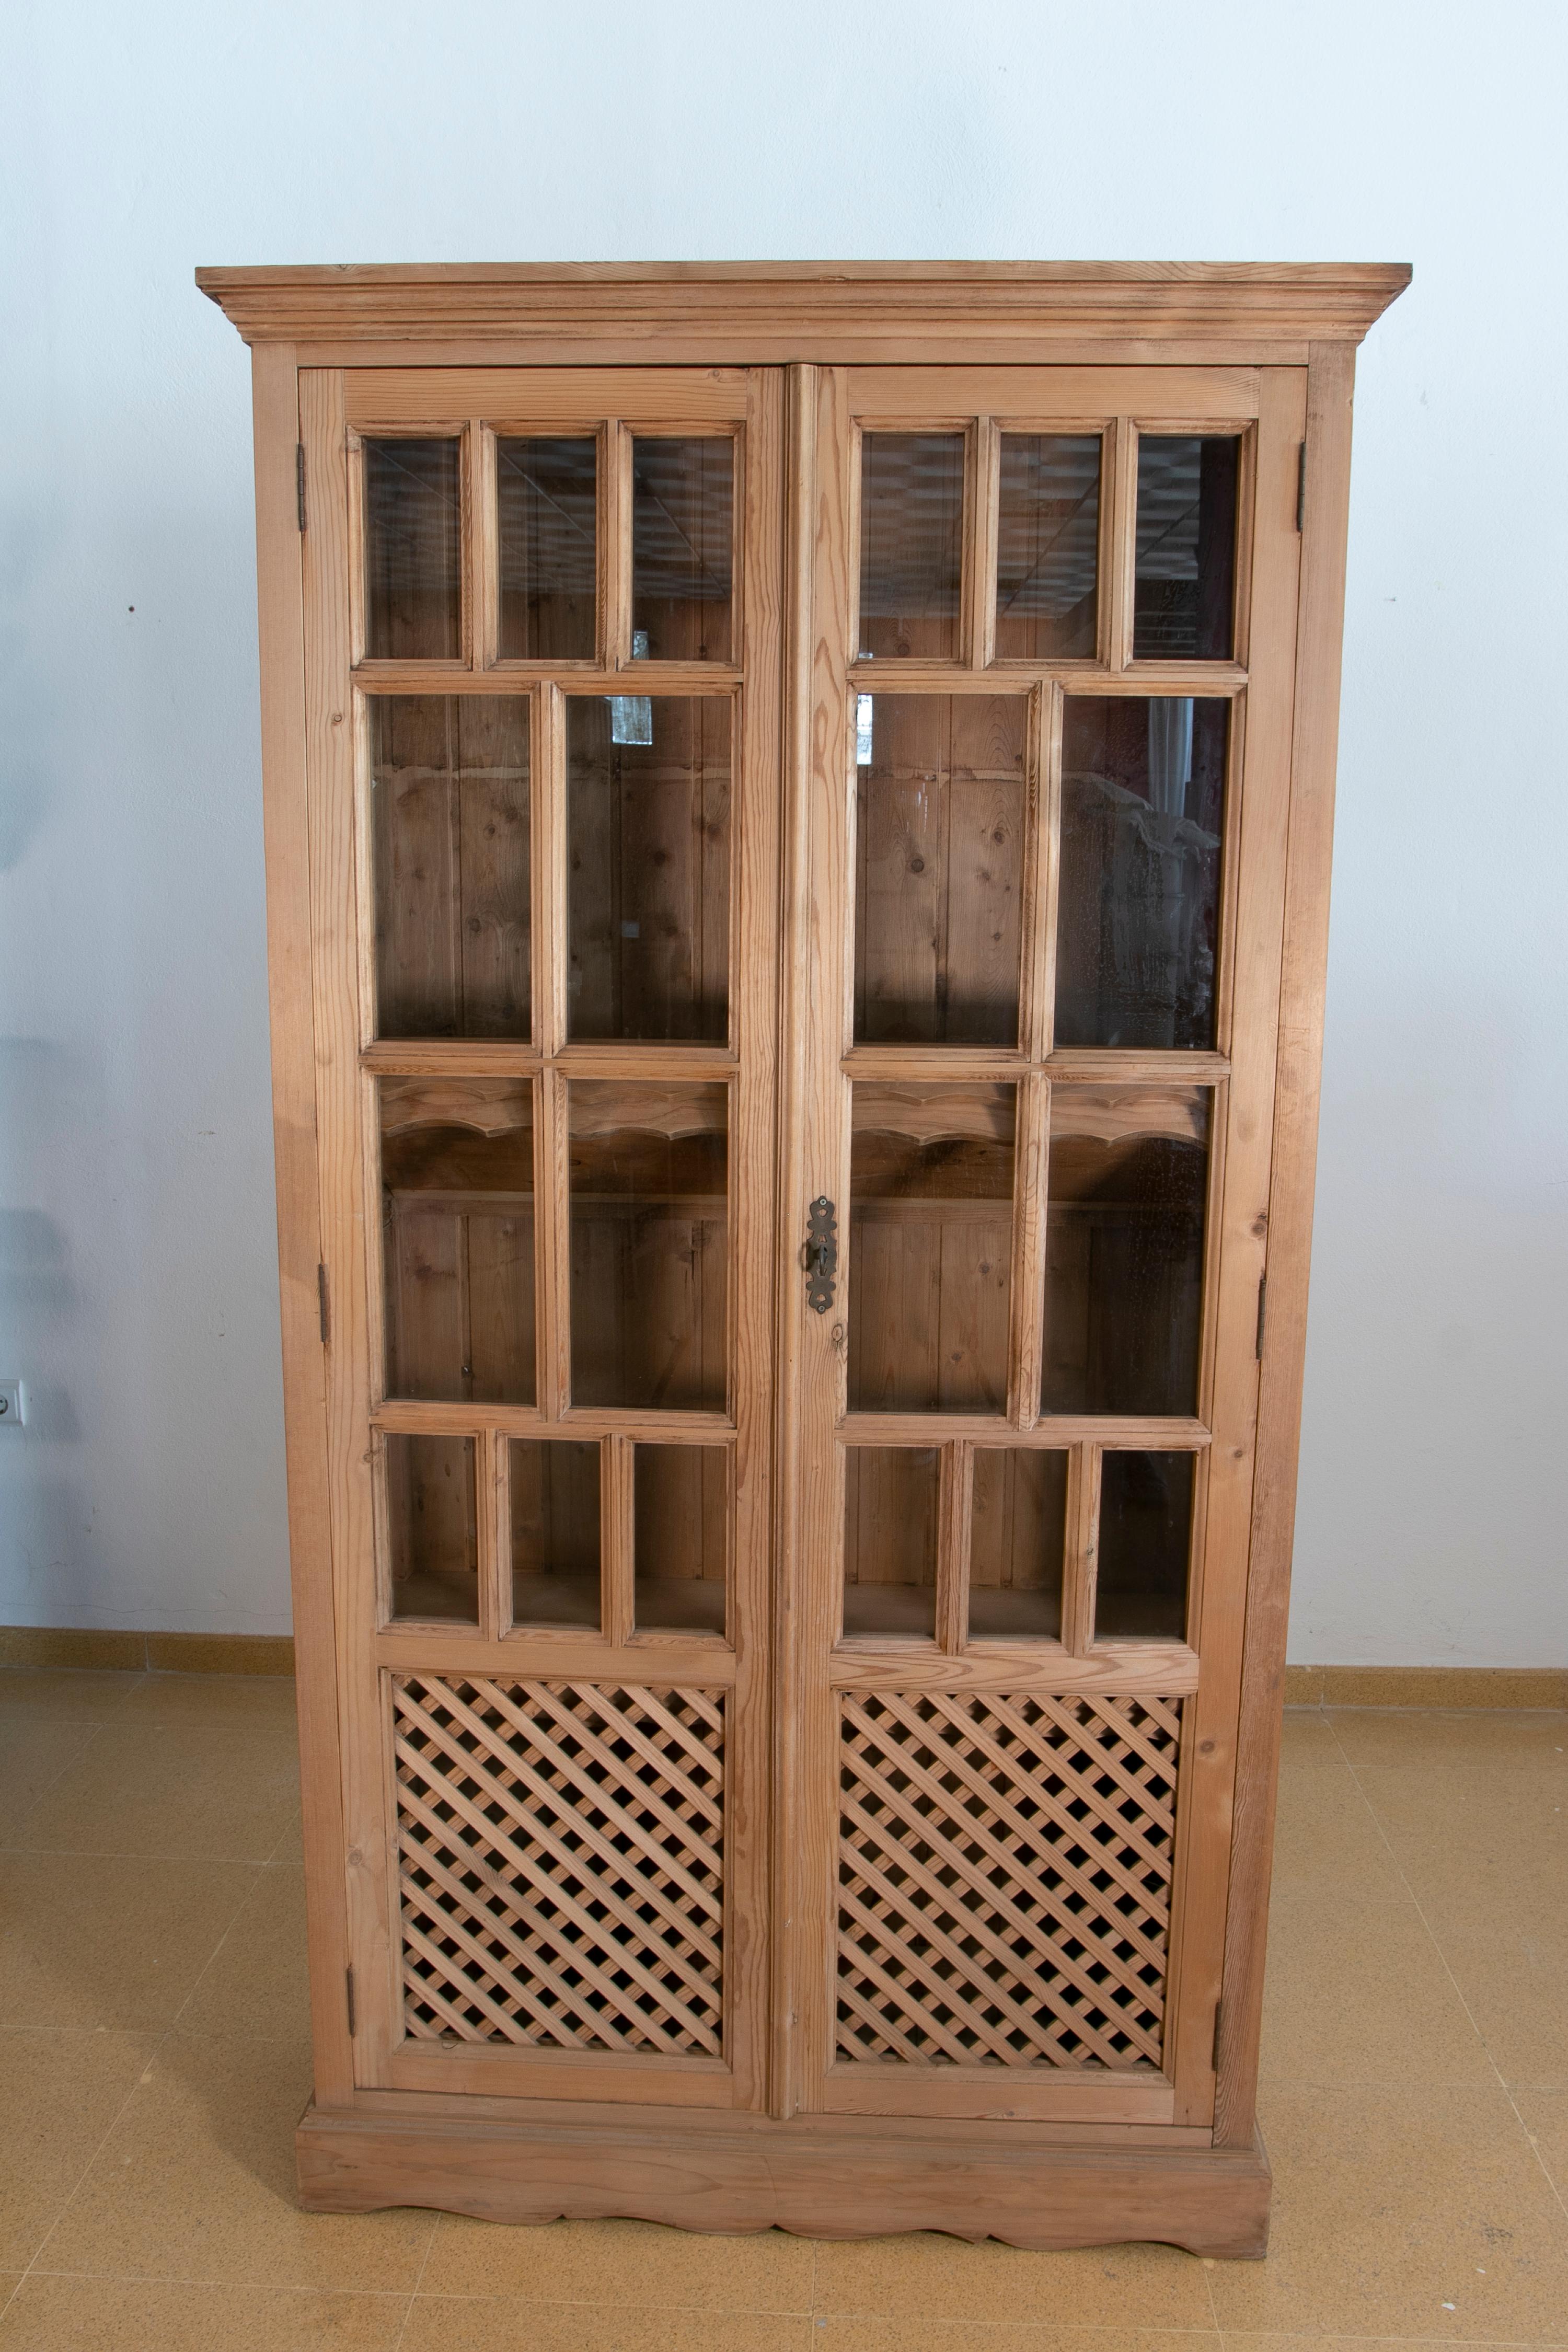 Spanish wooden cabinet with glass doors and Latticework.